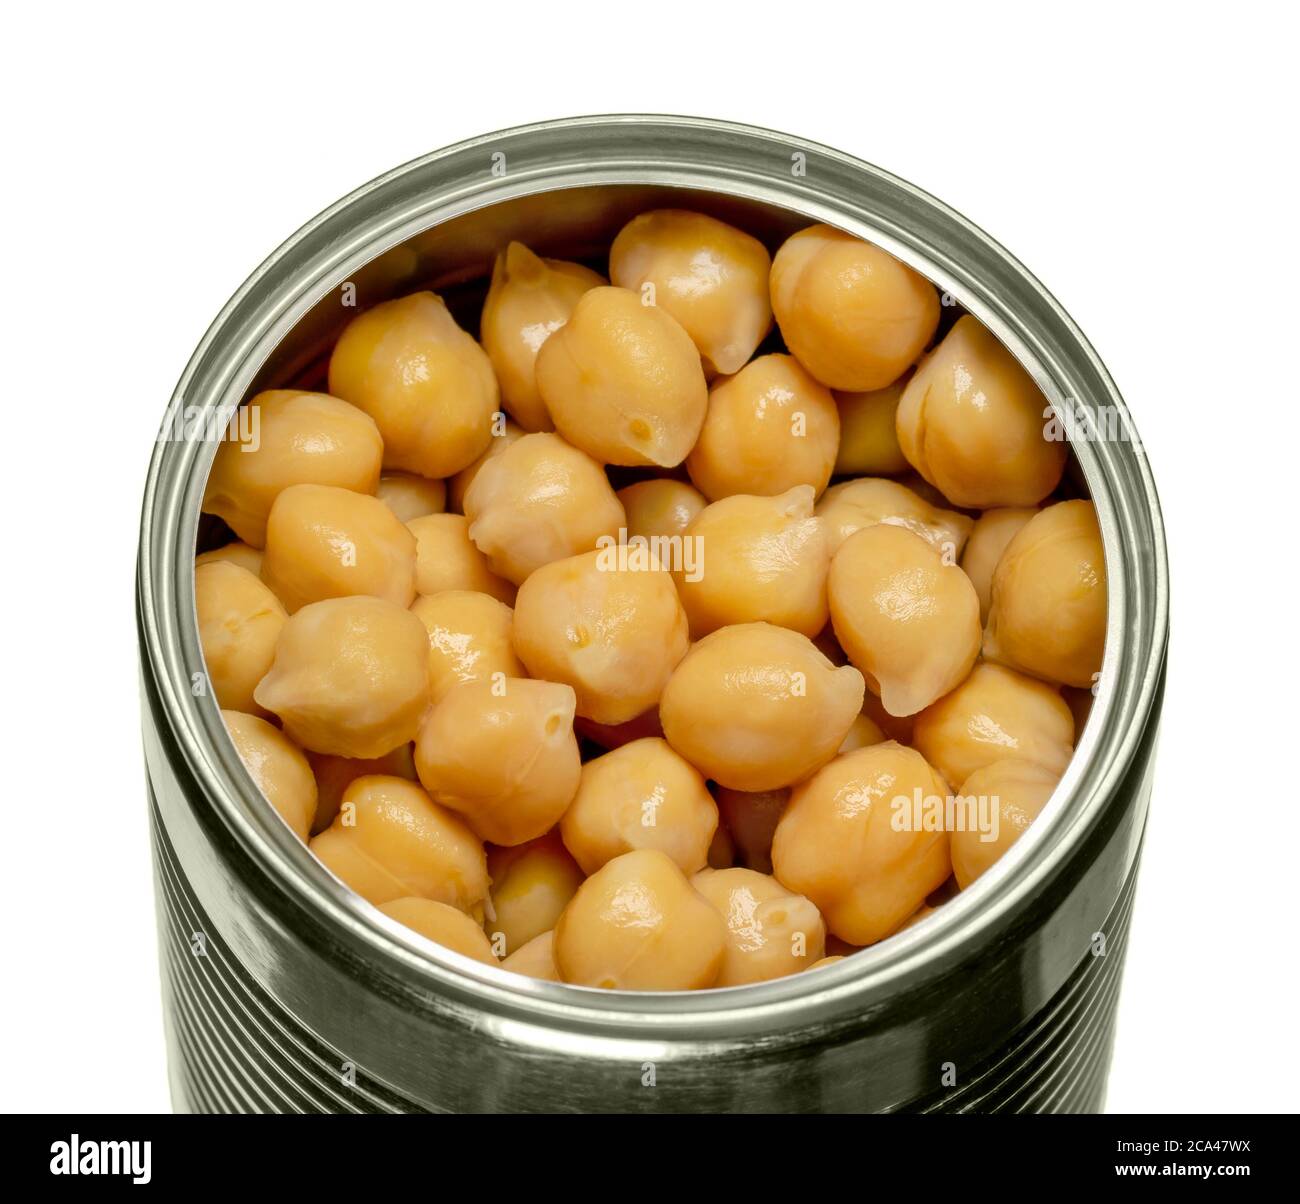 Canned chickpeas in an opened tin can. Large light tan chick peas, Cicer arientinum, also called hoummus. Boiled chickpeas, preserved with brine. Stock Photo